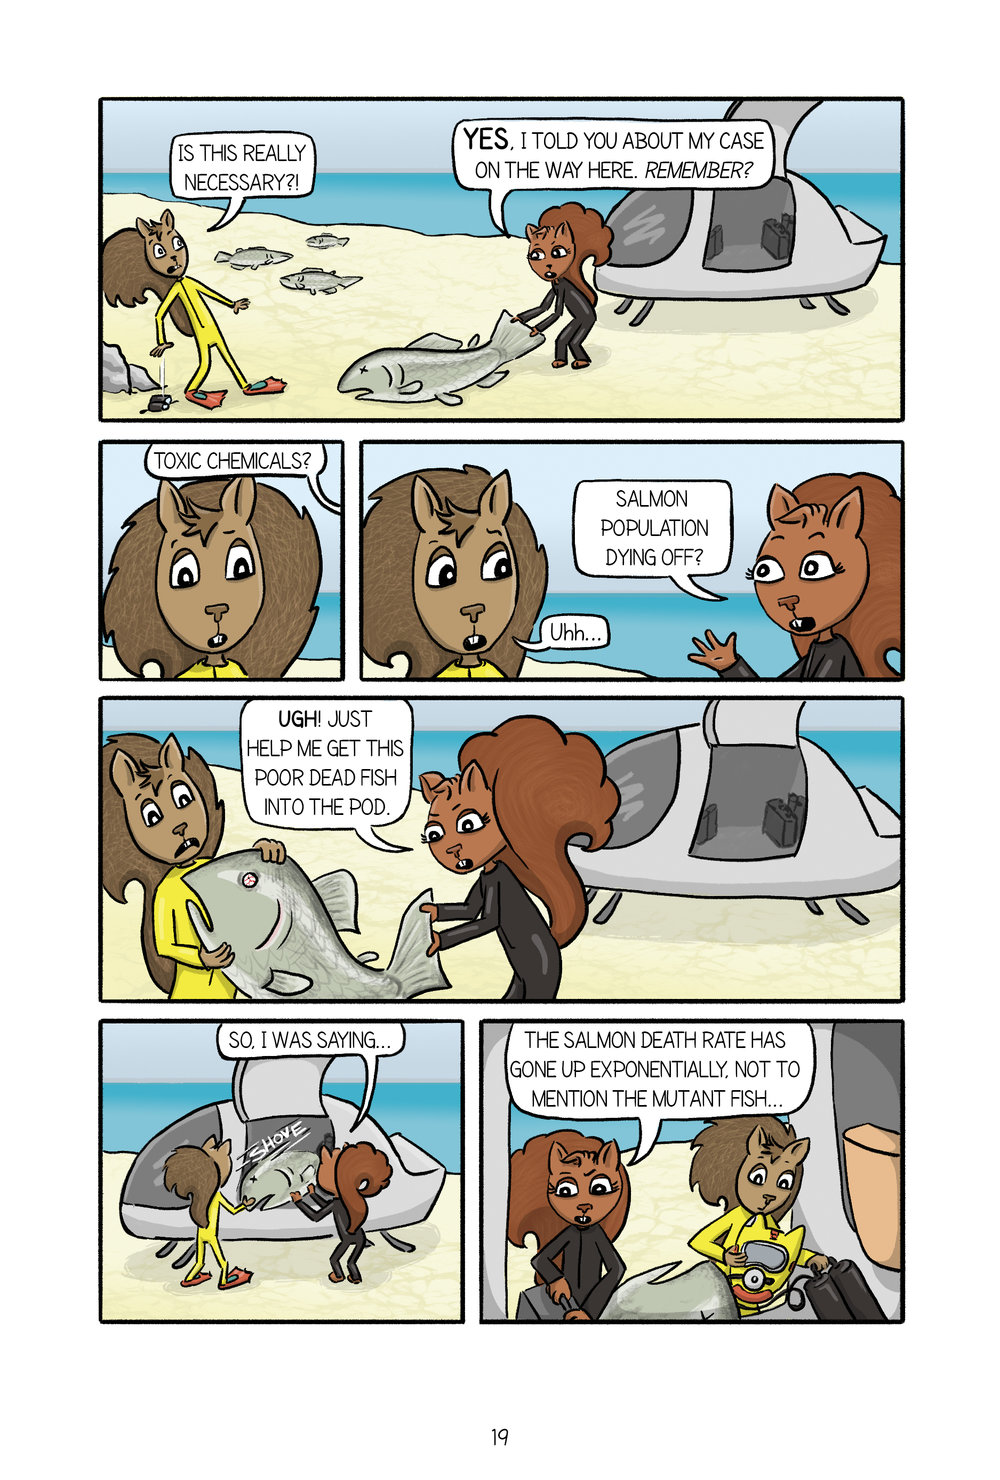 Page 19 Cognito is alarmed by touching the dead fish, but helps out anyway